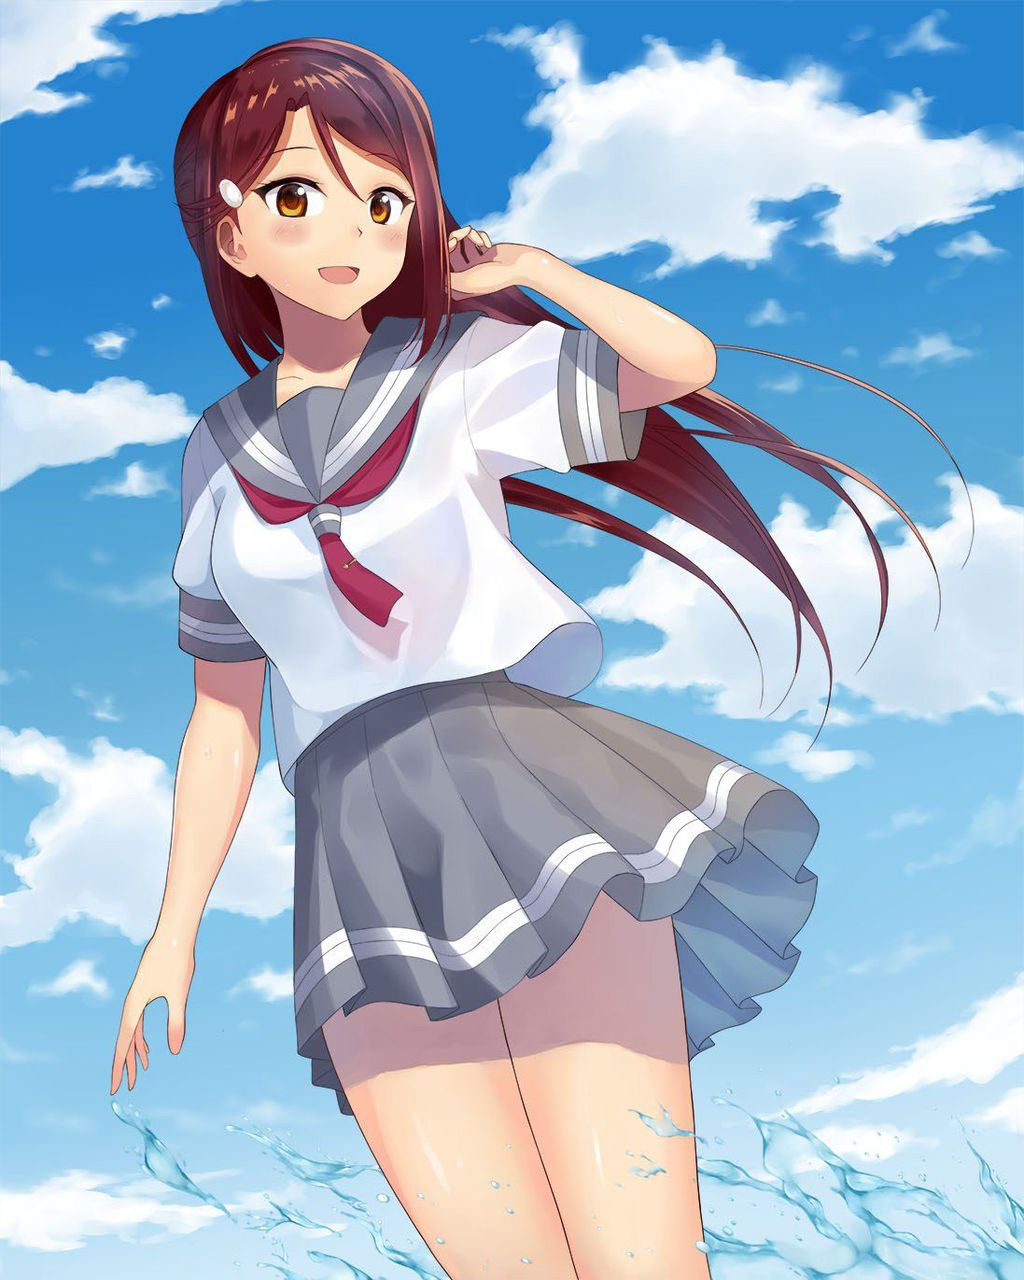 【Love Live】I think that it is the cutest girl in love live Image 22 10